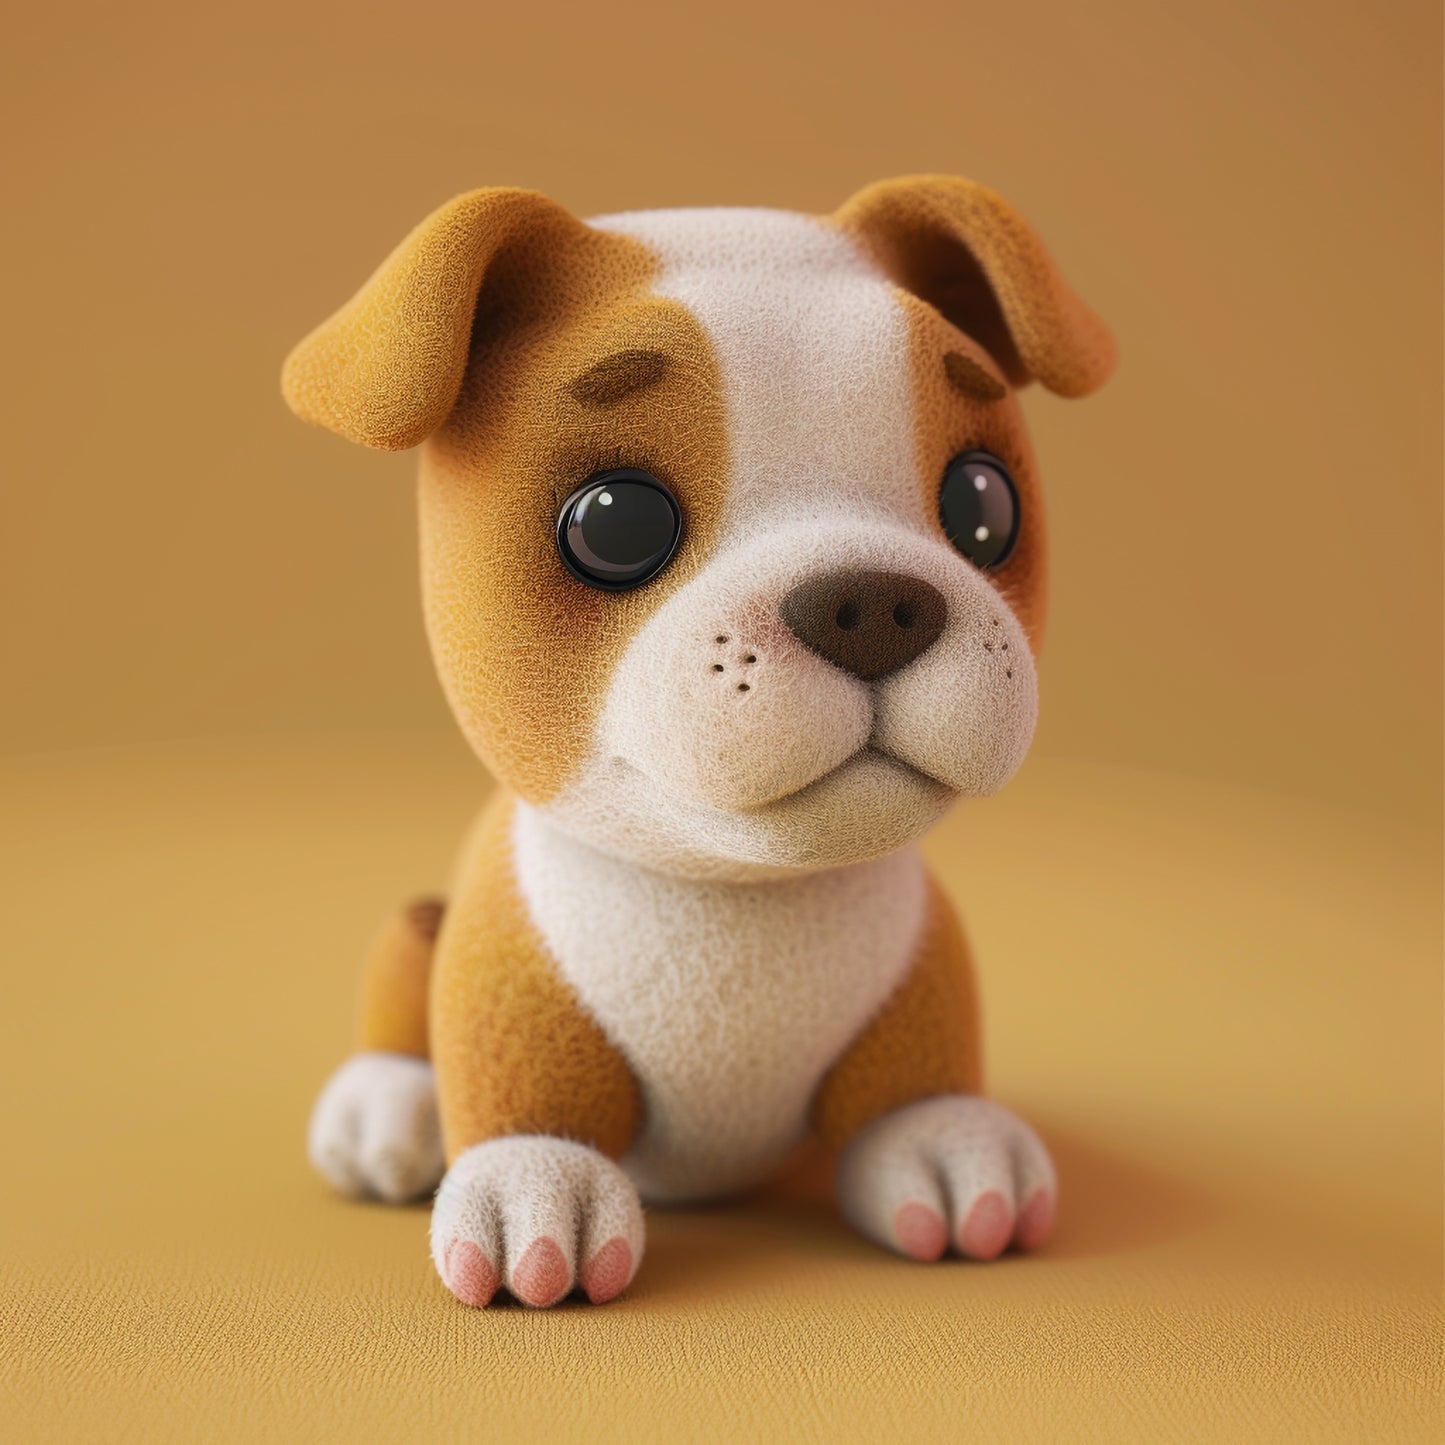 Adorable Illustration of a Cute Staffordshire Bull Terrier